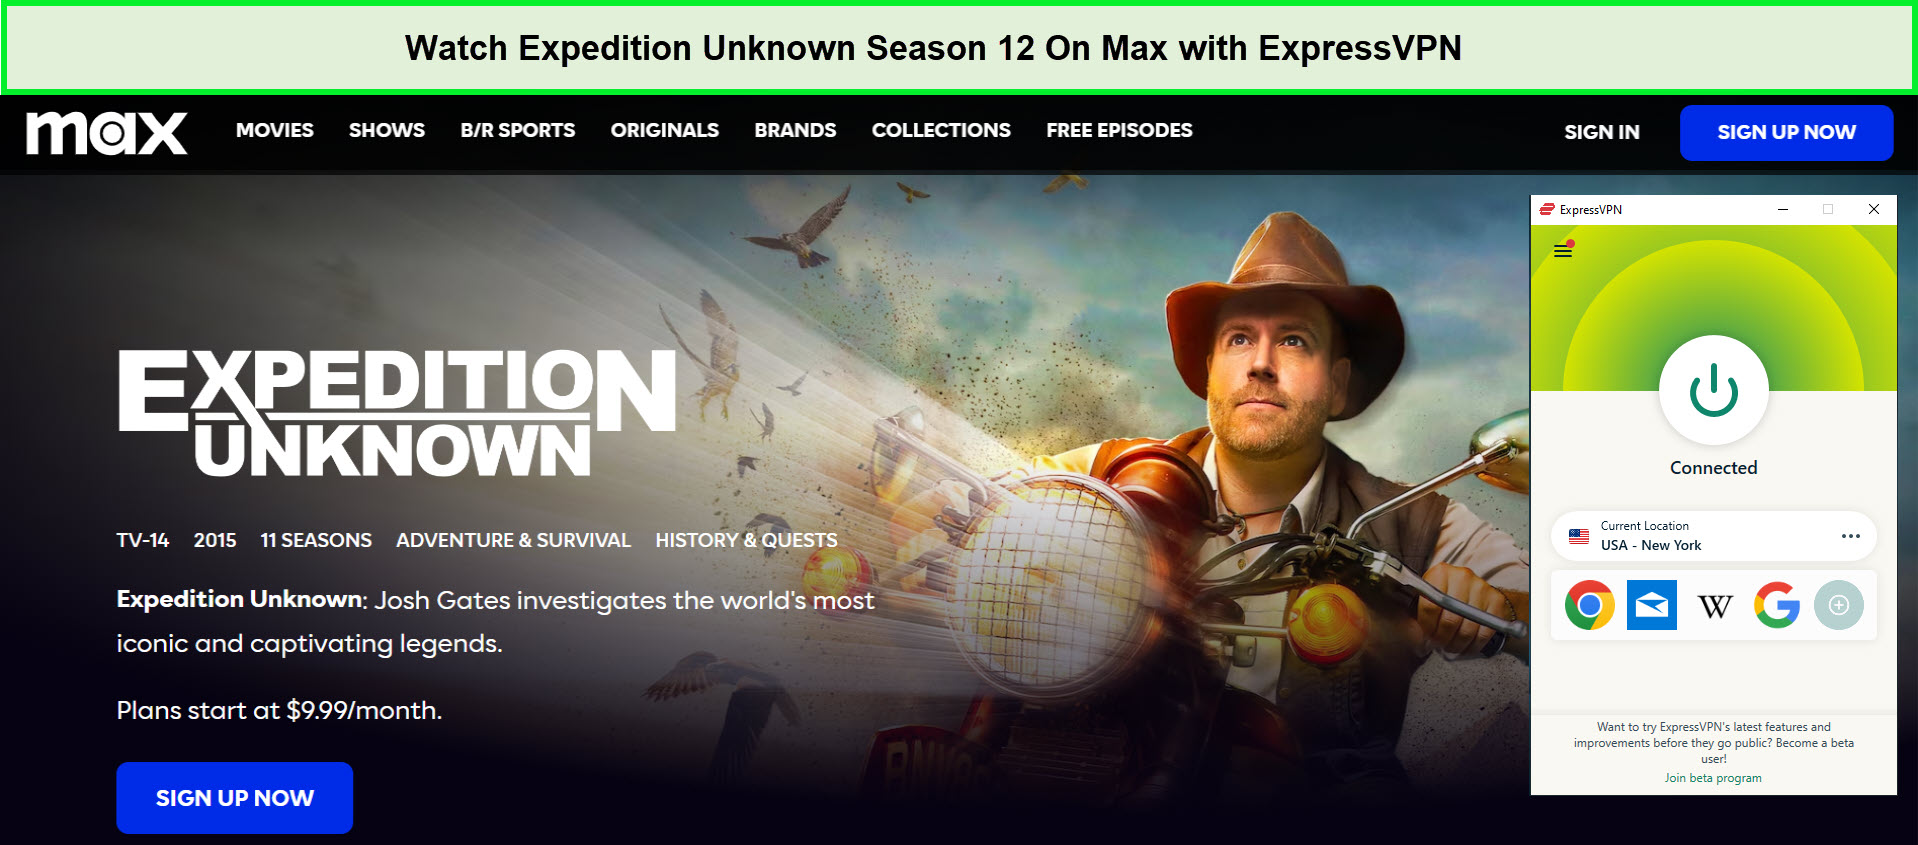 Watch-Expedition-Unknown-Season-12-in-Germany-On-Max-with-ExpressVPN